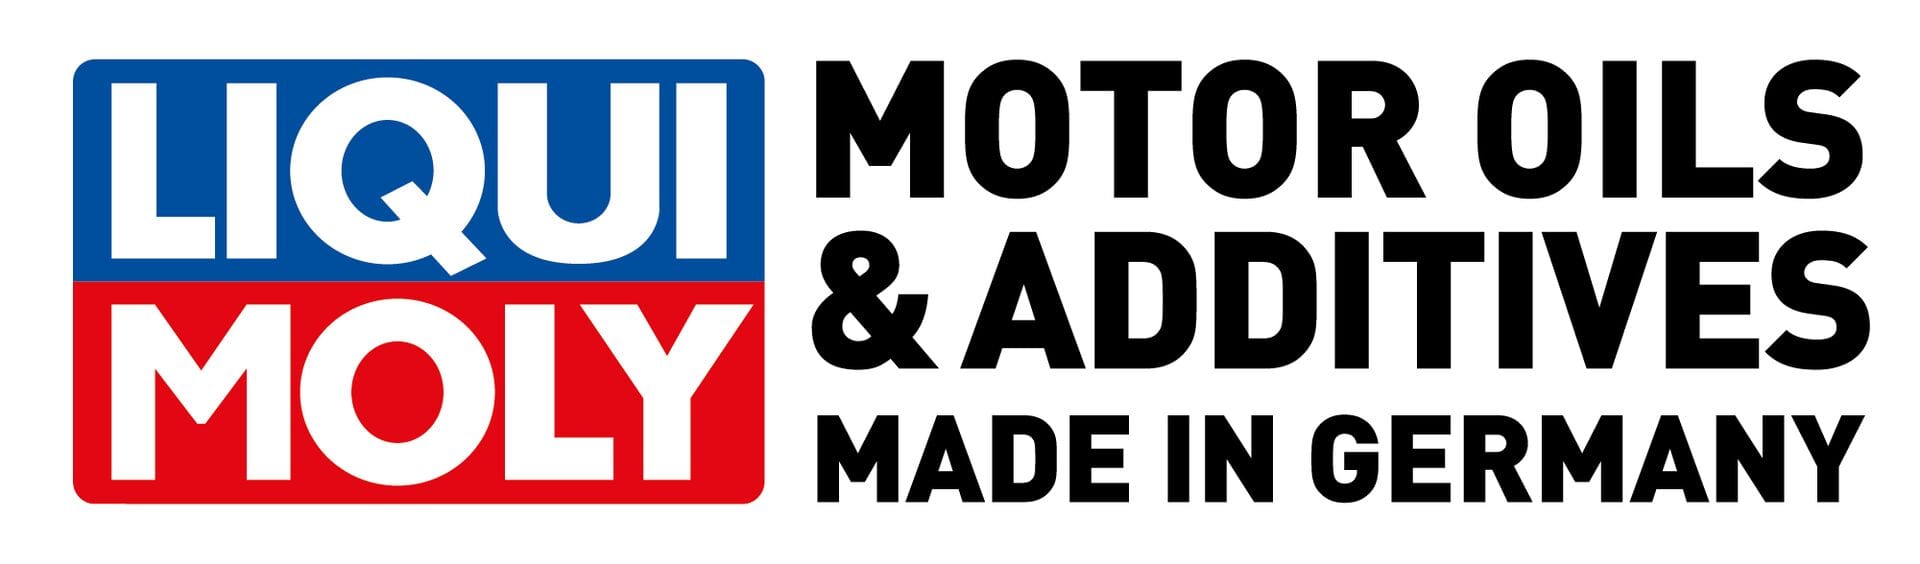 LIQUI MOLY Top Tec ATF 1800 (20L) - Automatic Transmission - Audi & Volkswagen ZF6 & ZF8 Gearboxes.